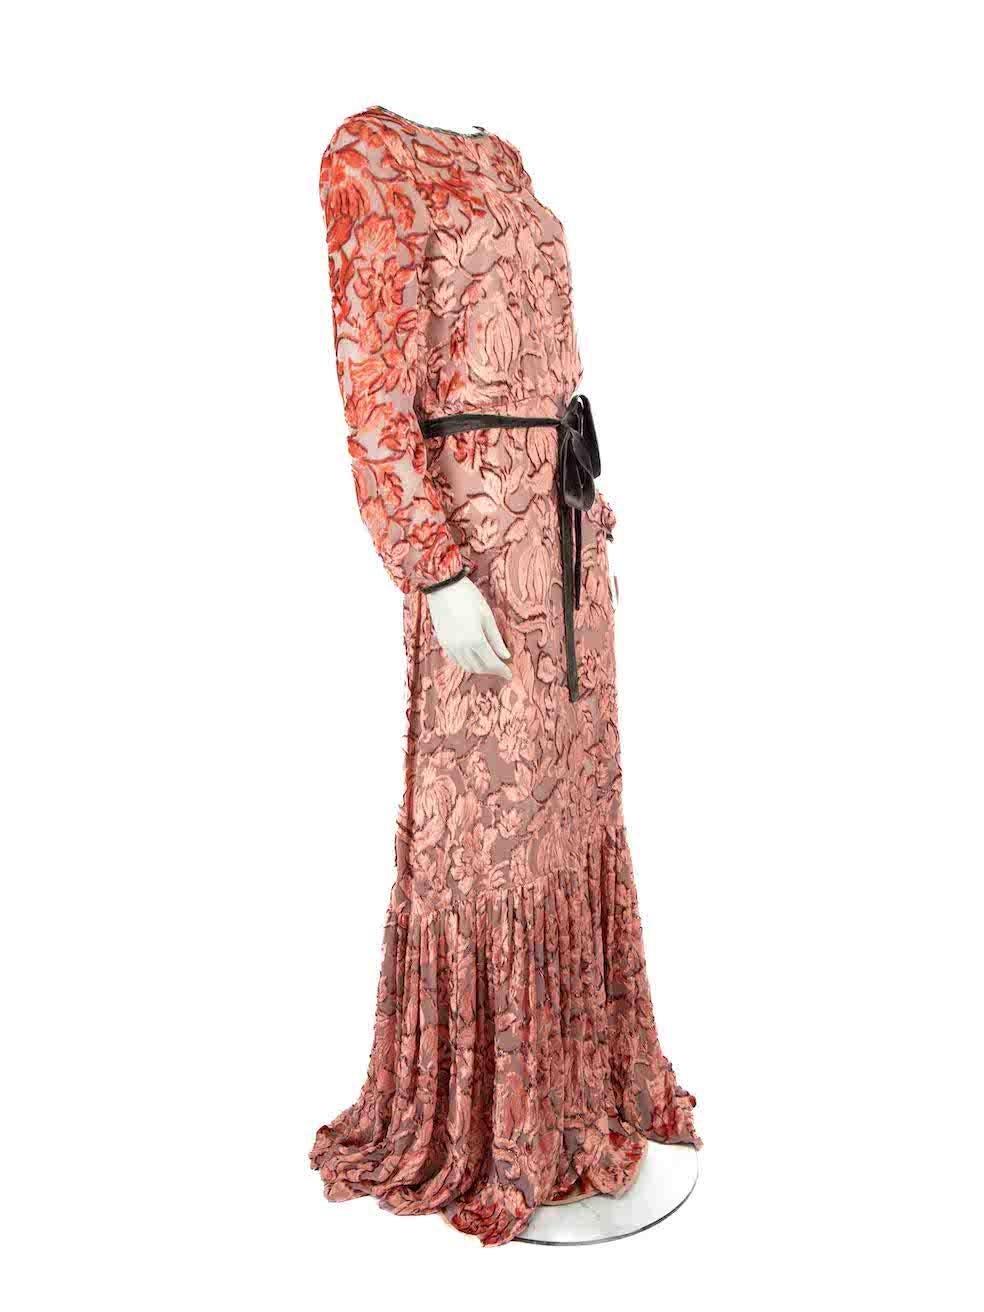 CONDITION is Very good. Minimal wear to dress is evident. Minimal wear to the rear neck-edge fastening with a missing button and hem stitching has unraveled on this used Alexis designer resale item.
 
 
 
 Details
 
 
 Pink
 
 Silk
 
 Gown
 
 Floral